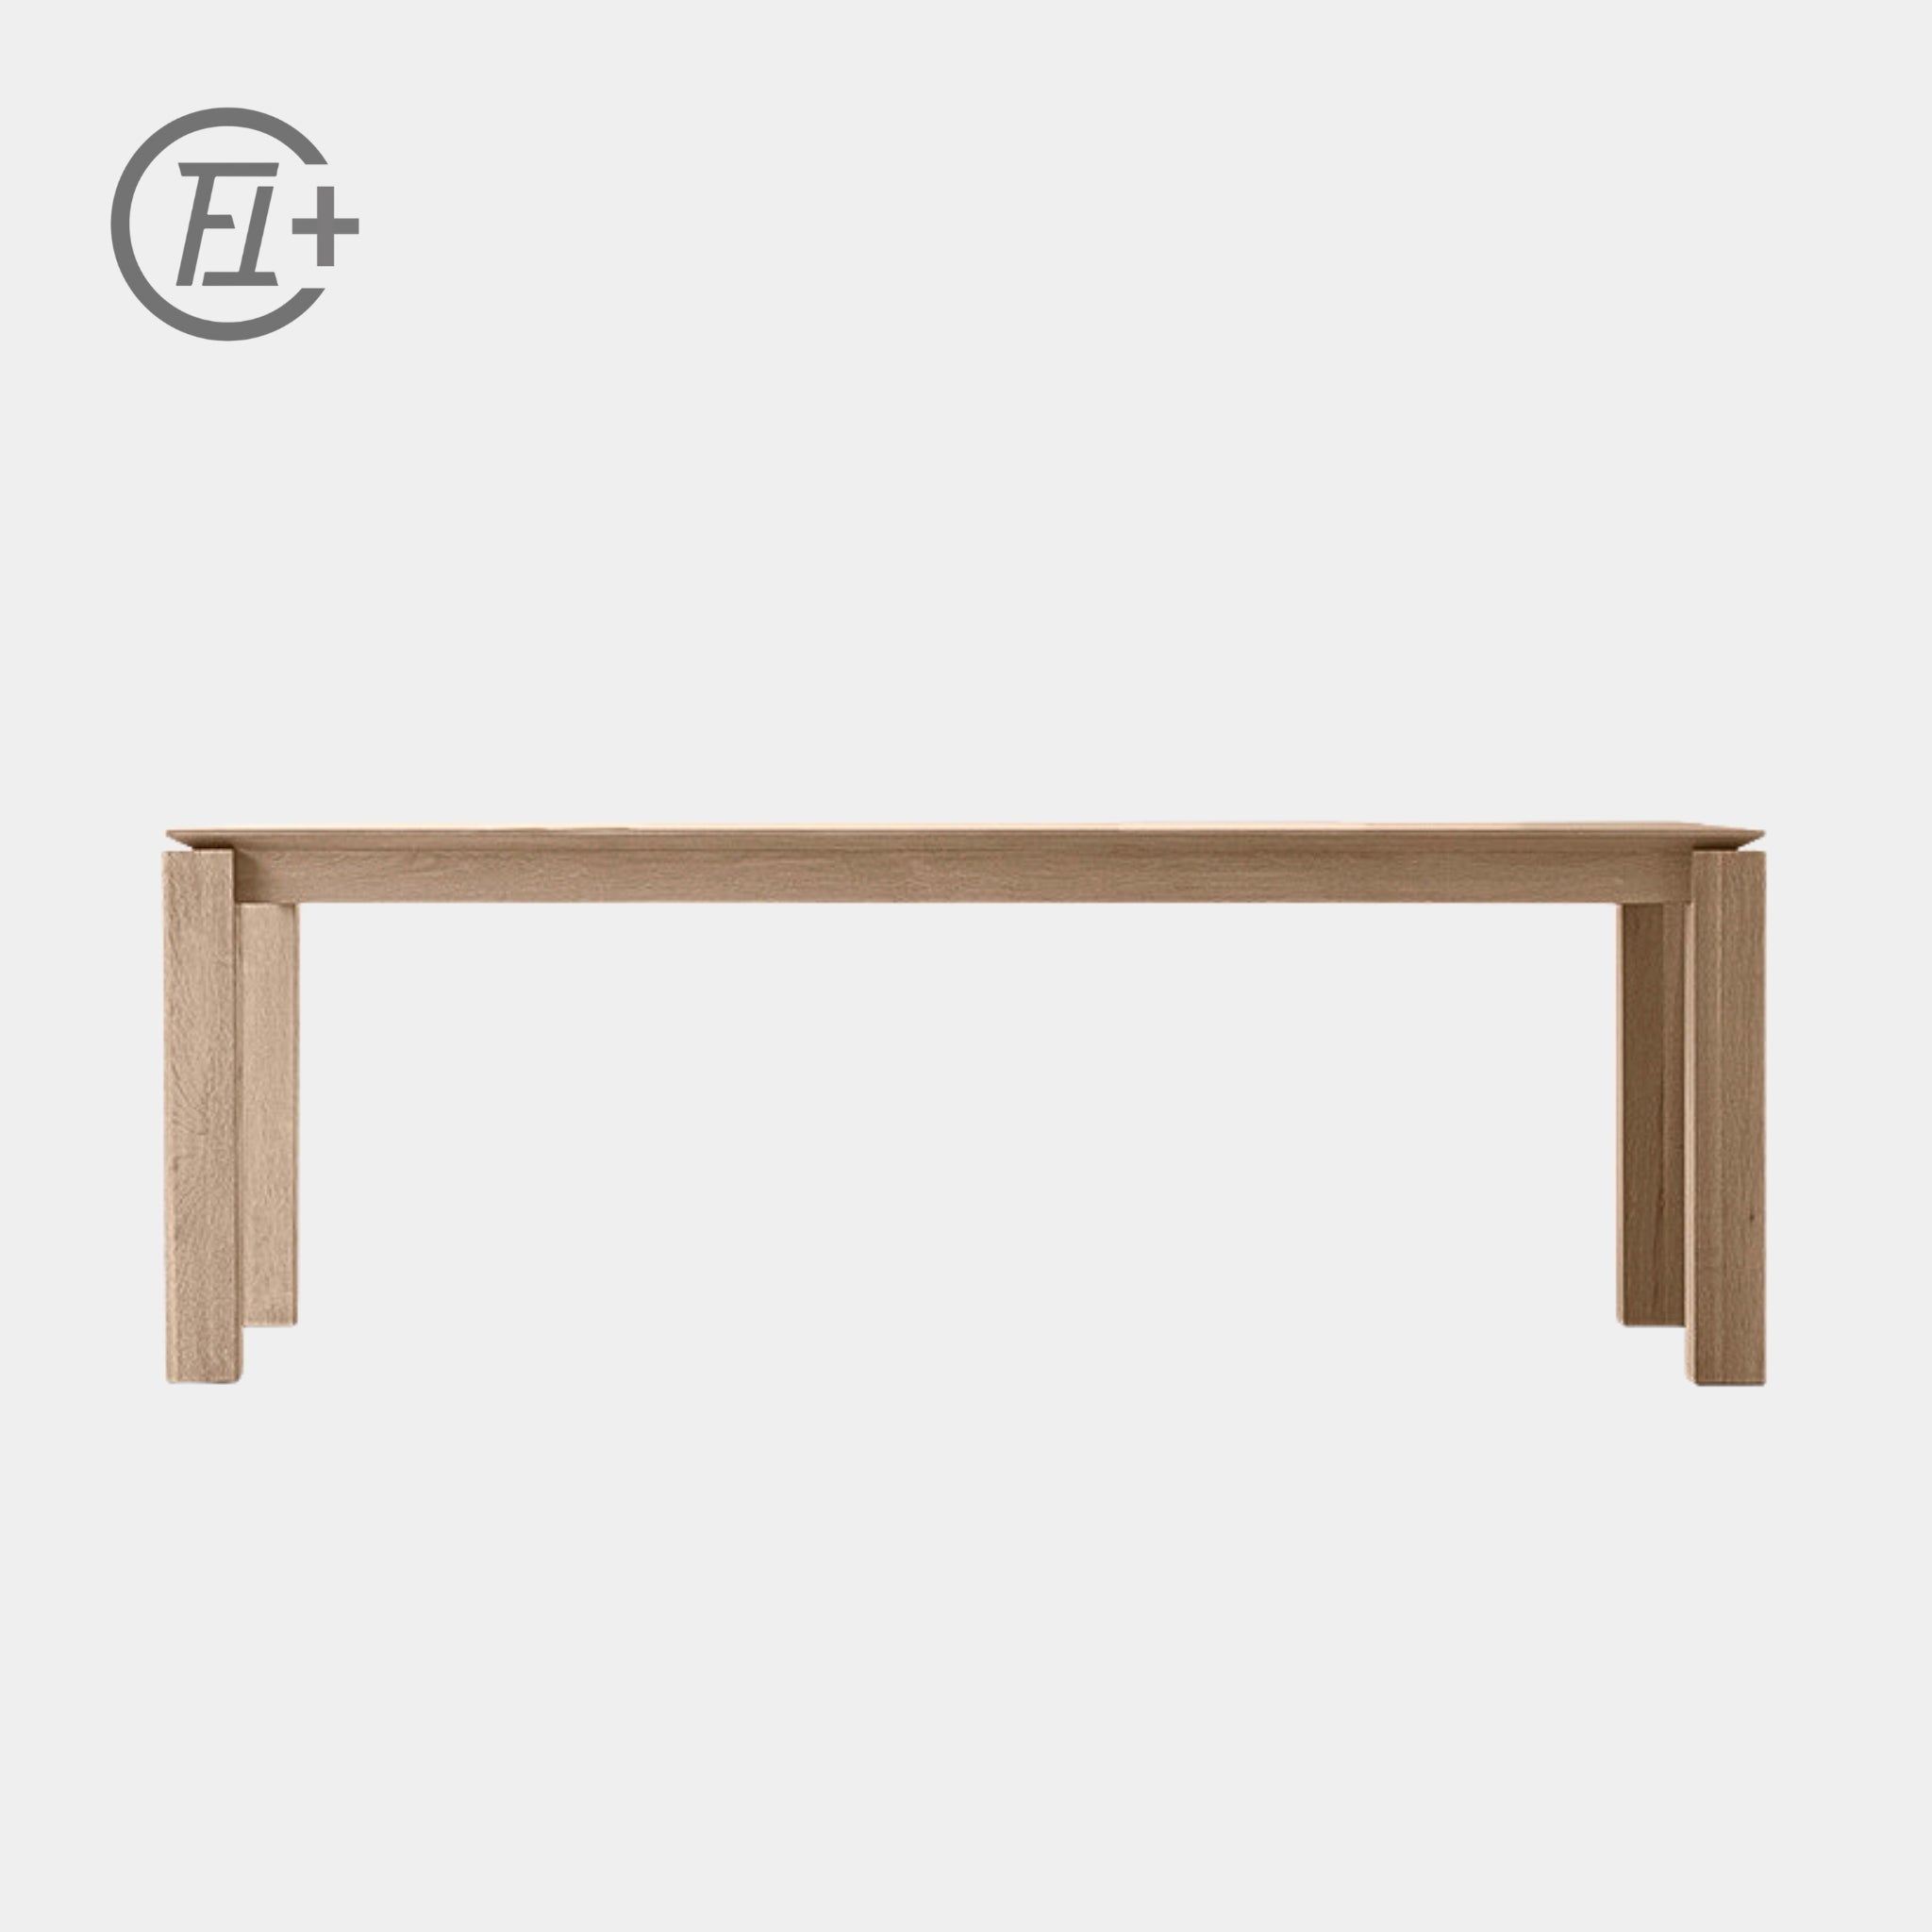 The Feelter Vemb Dining Table